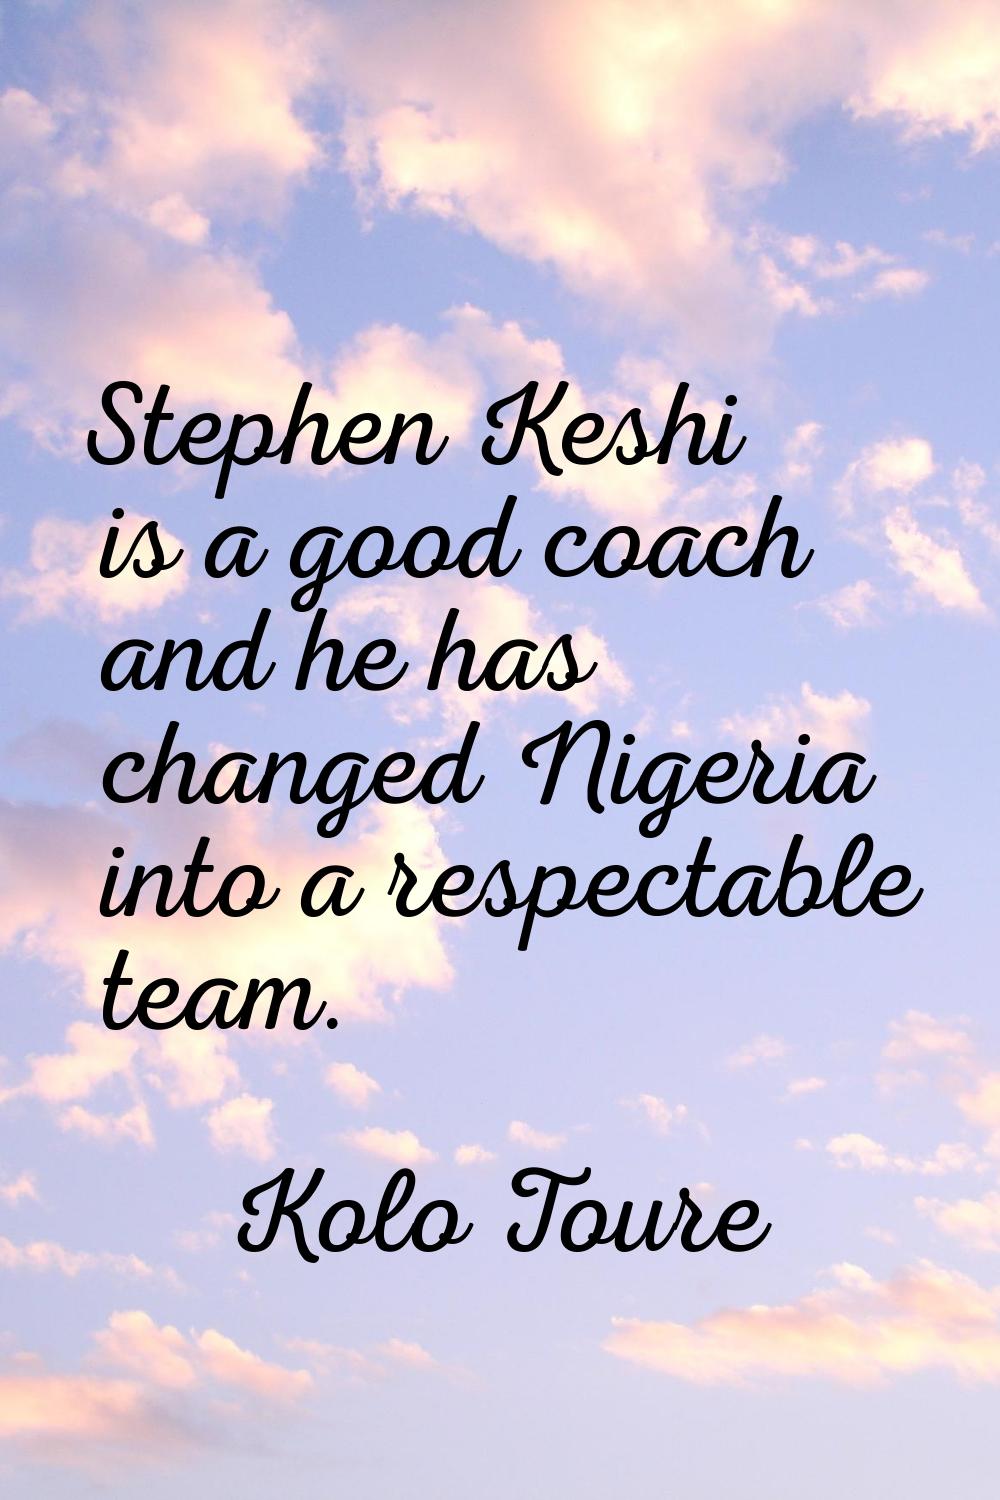 Stephen Keshi is a good coach and he has changed Nigeria into a respectable team.